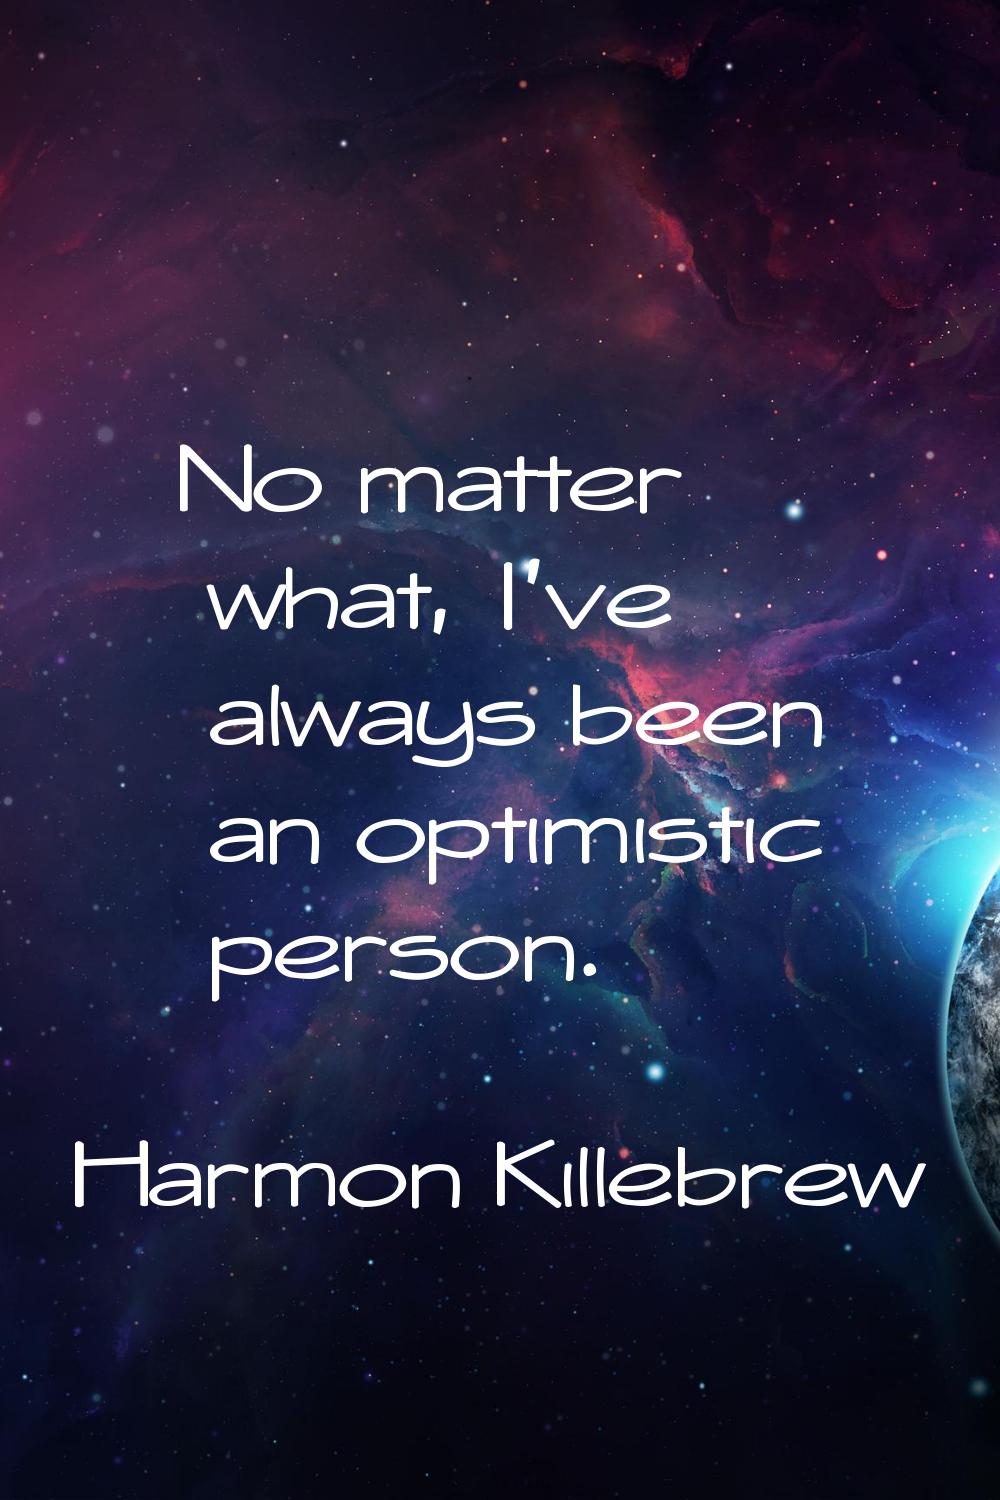 No matter what, I've always been an optimistic person.